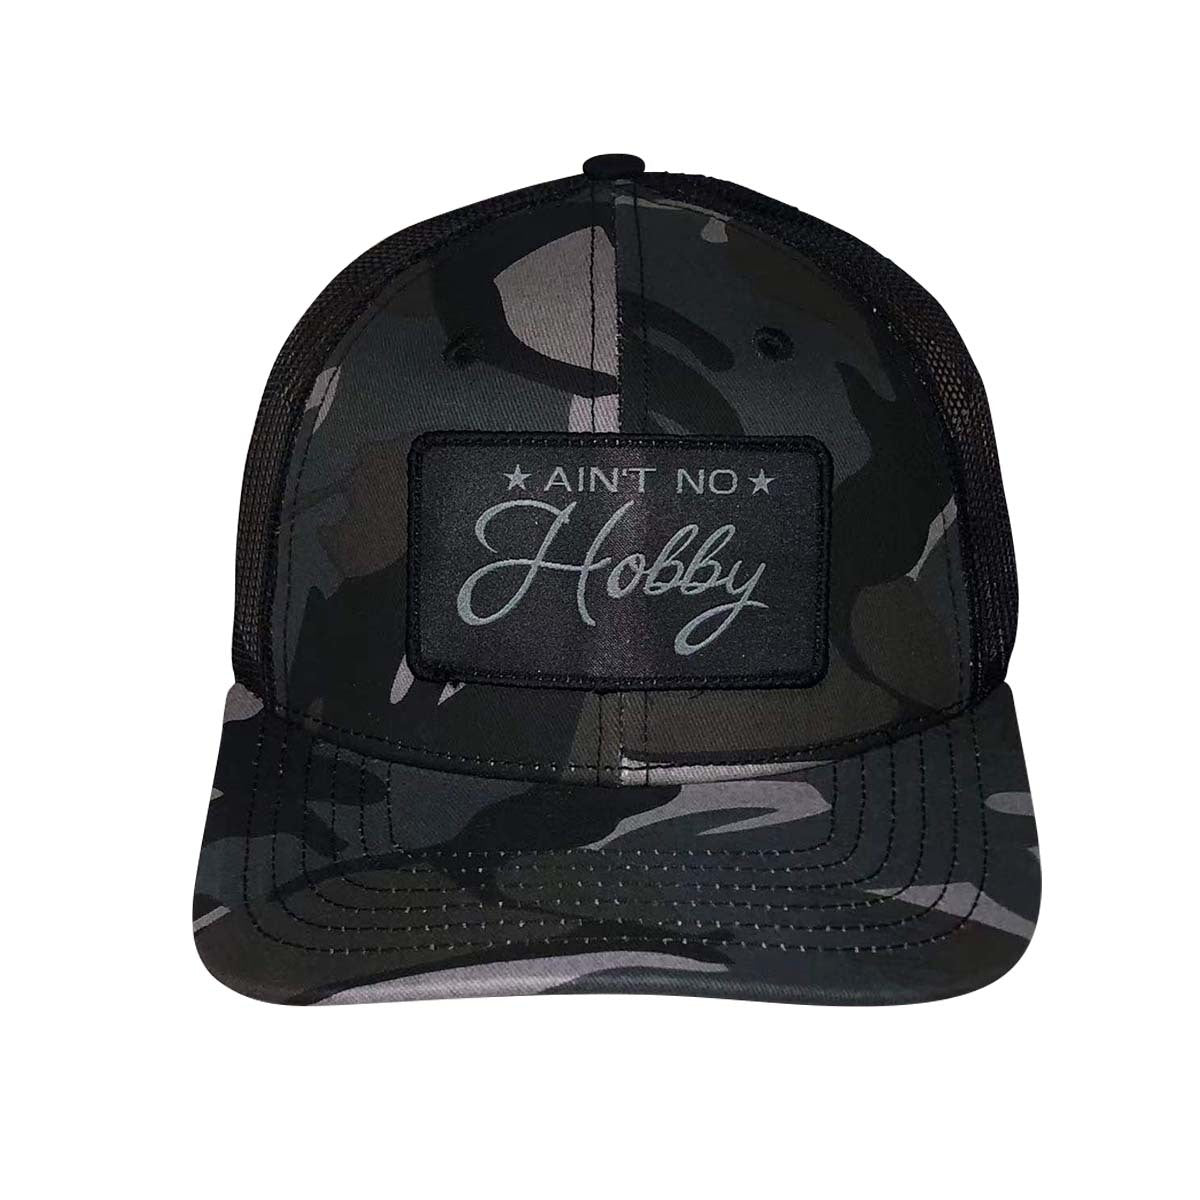 Barstool Golf Ain't No Hobby Patch Camo Trucker Hat-Hats-Fore Play-Black-One Size-Barstool Sports